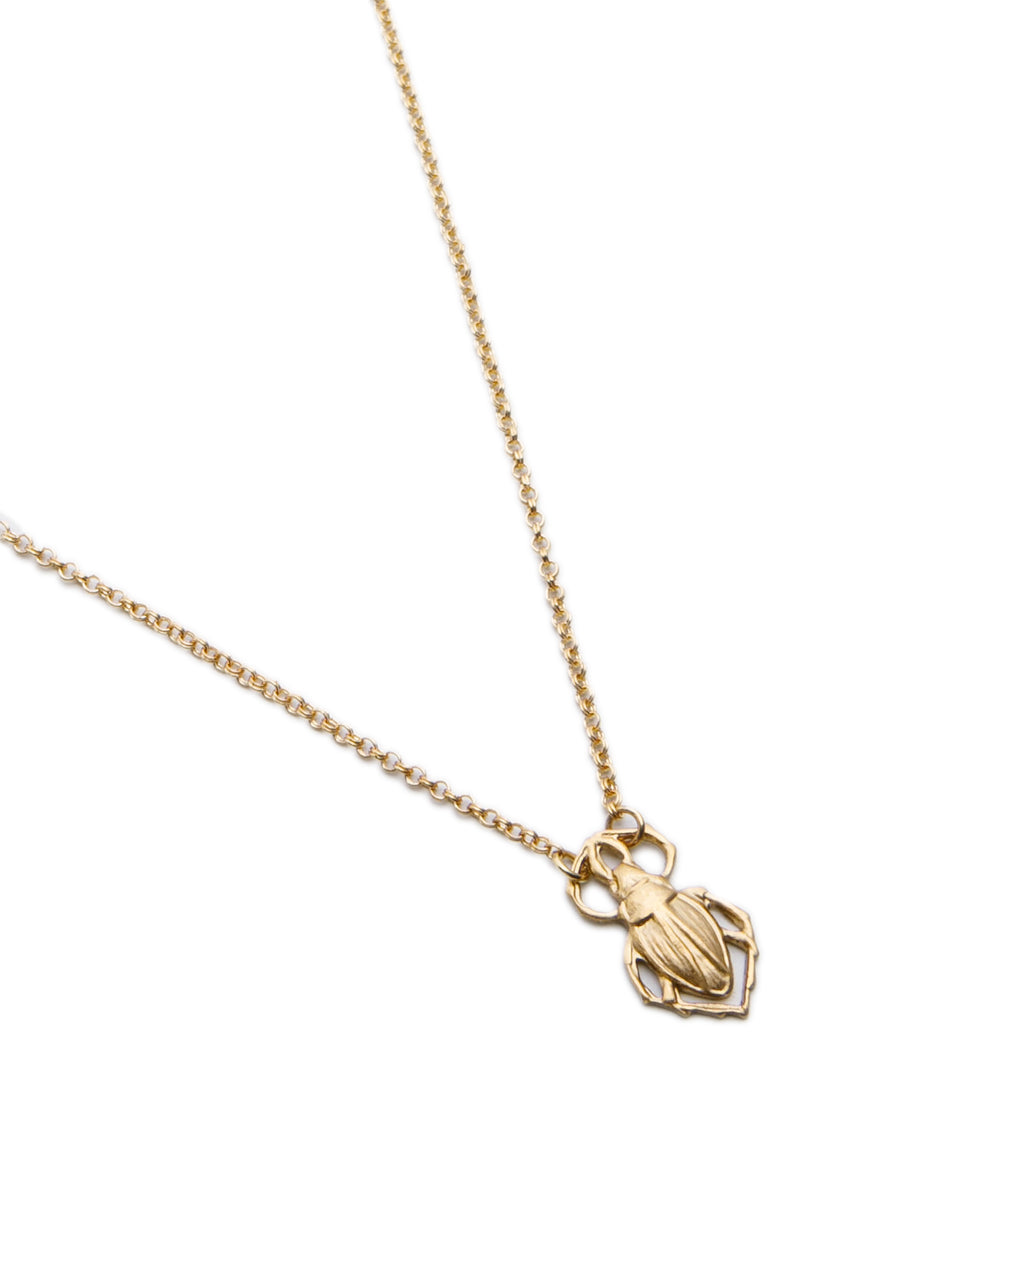 Small Brass Beetle Necklace